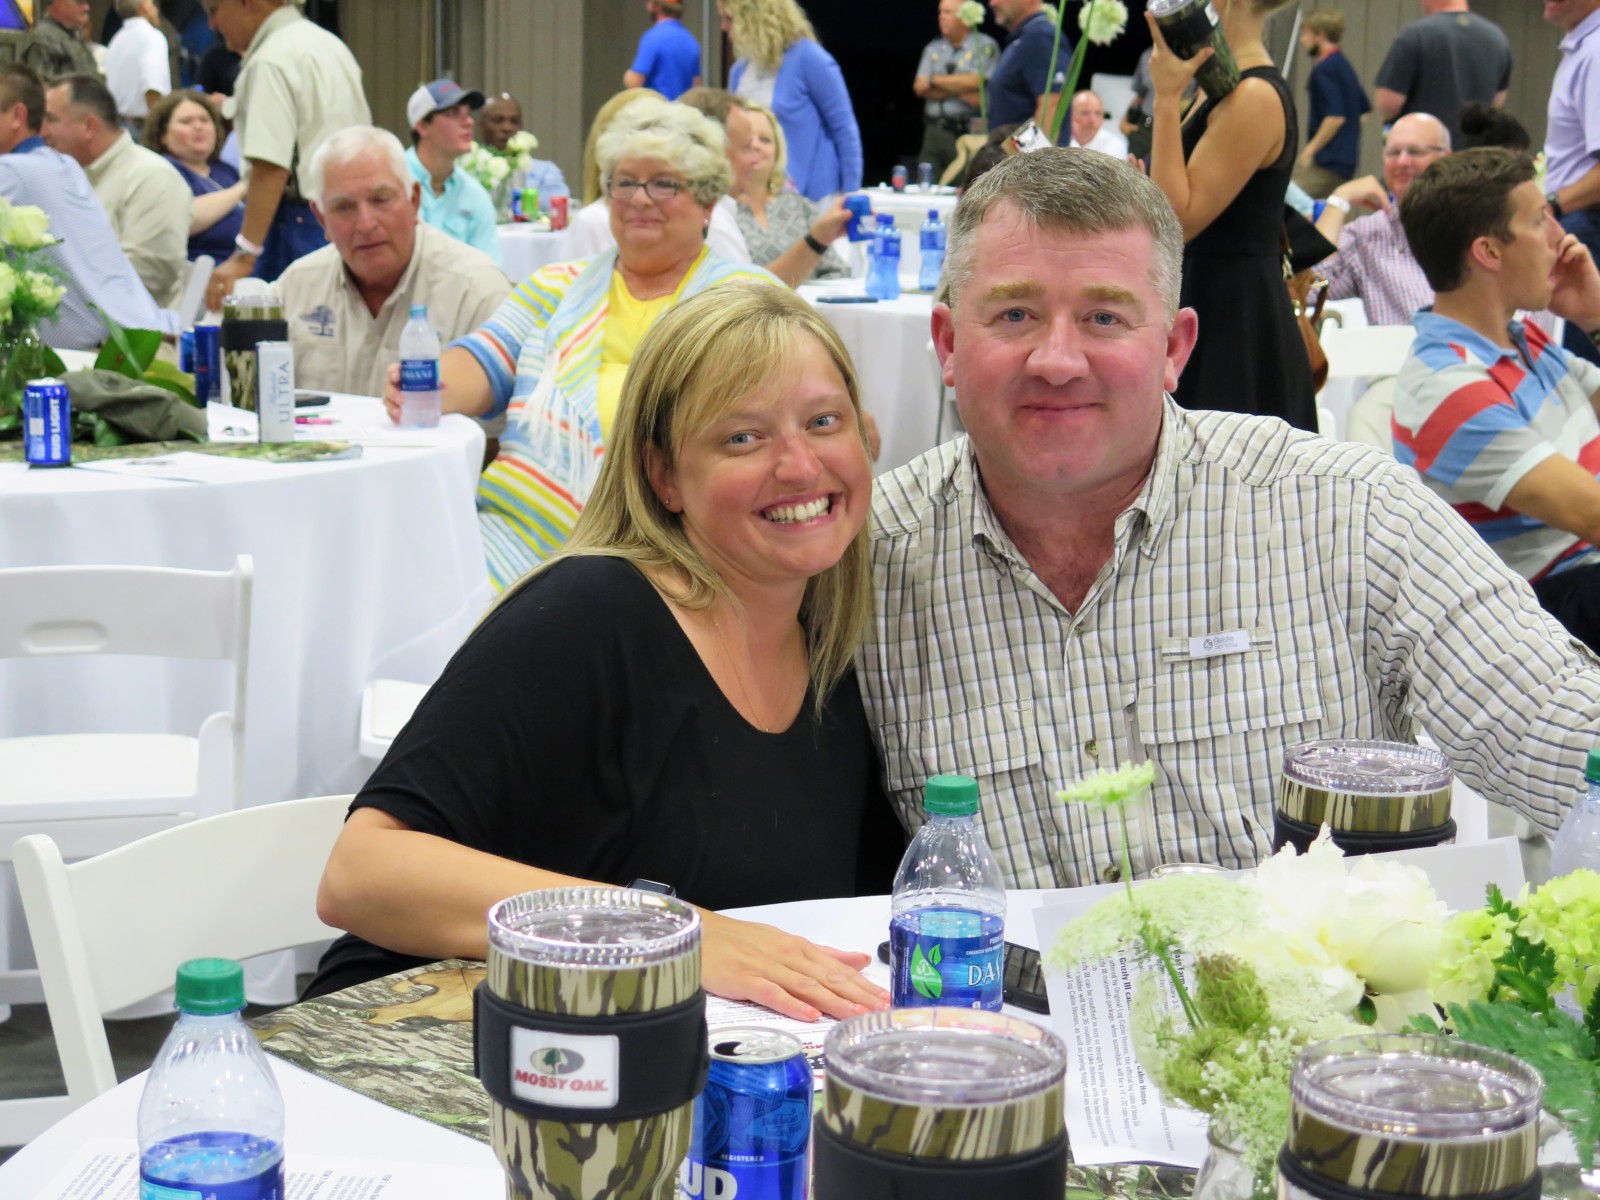 couple at auction dinner during cooking ribs for auction dinner event Mossy Oak Properties Fox Hole Shootout